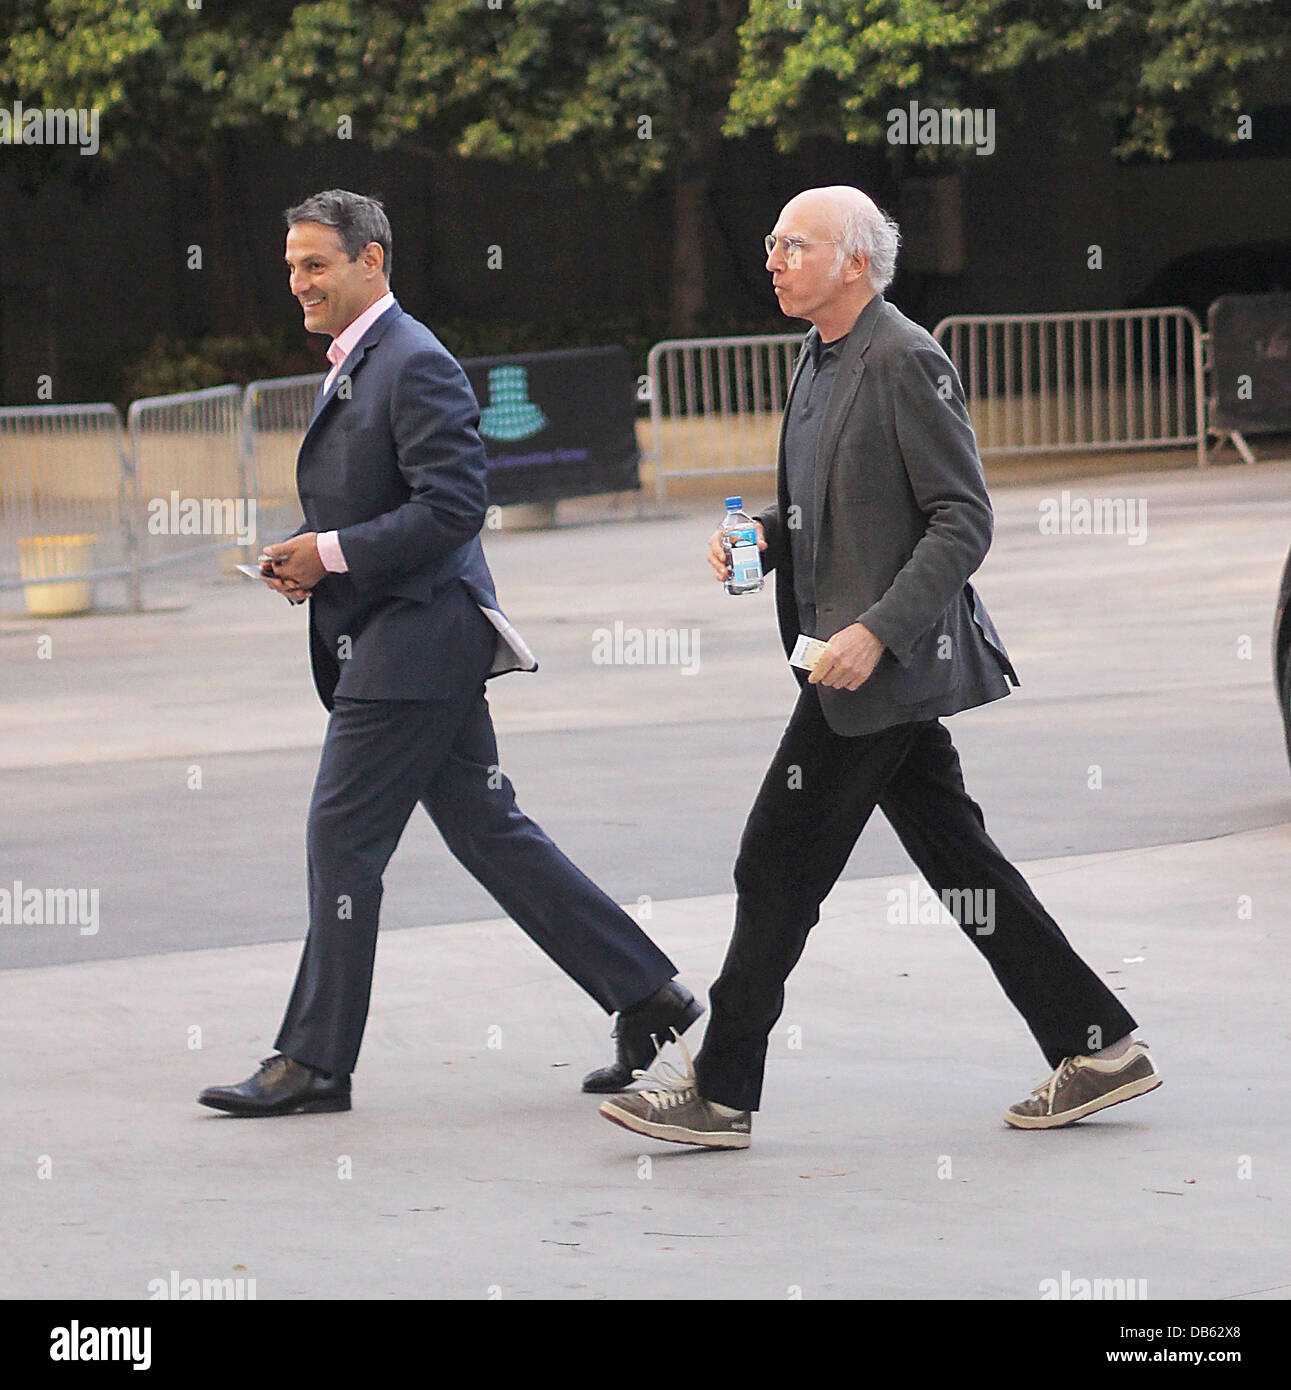 Larry David Celebrities arriving at The Staples Center for Game 2 of the  NBA Western Conference Semi-Finals between LA Lakers and Dallas Mavericks  Los Angeles, California - 04.05.11 Stock Photo - Alamy